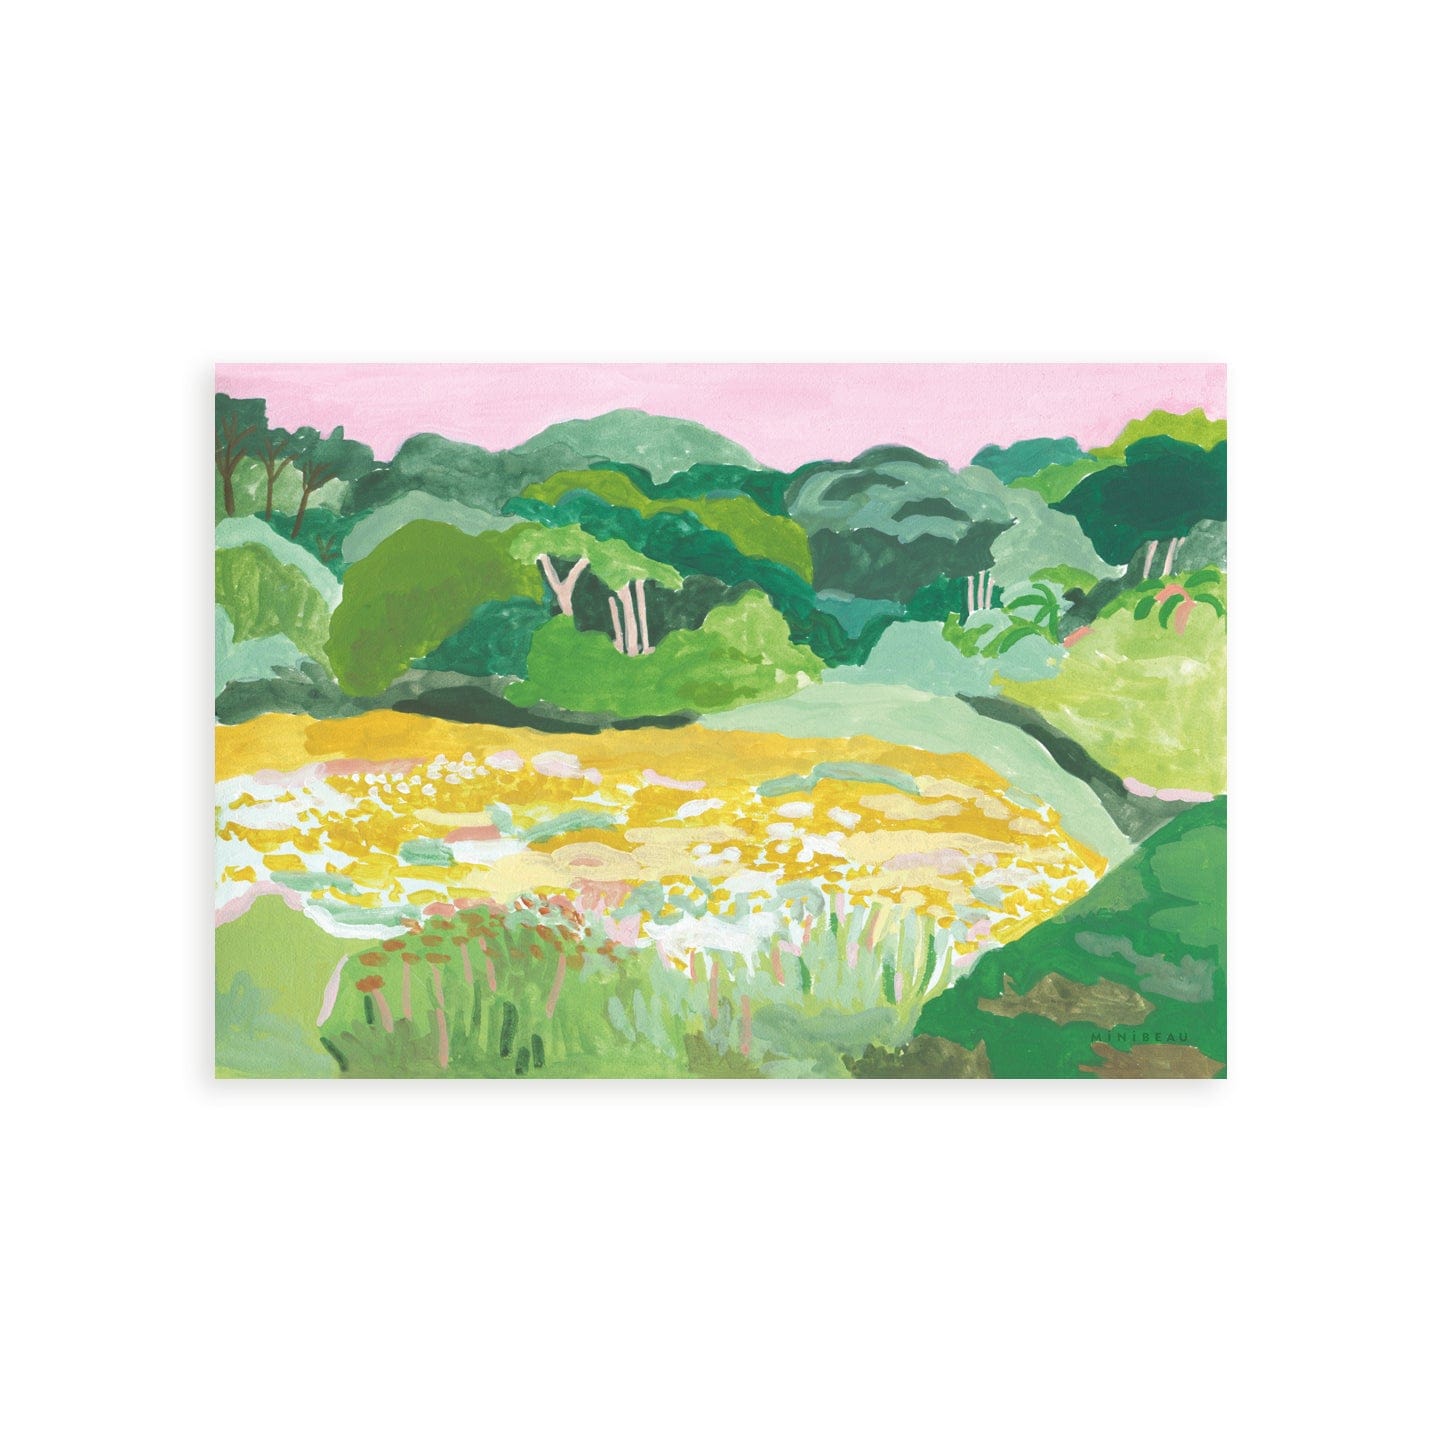 Hand painting landscape painting of a beautiful countryside meadow with flowers in bloom, full flowing trees and a pretty pink sunset in the background. 